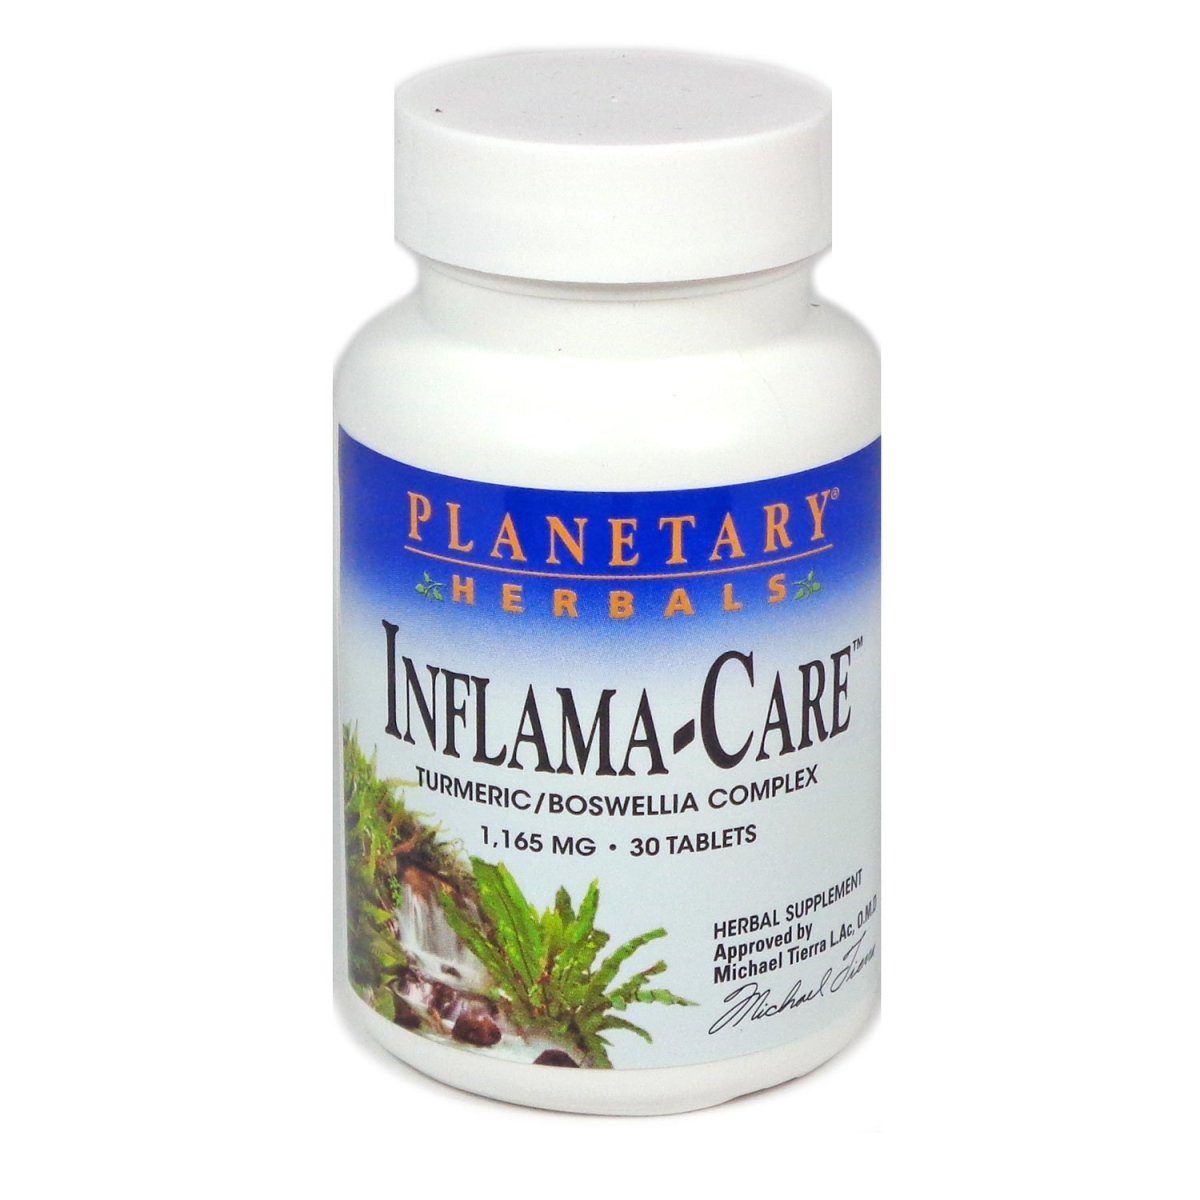 PLANETARY HERBALS Inflama-Care Nutritional Supplement, 30 Count